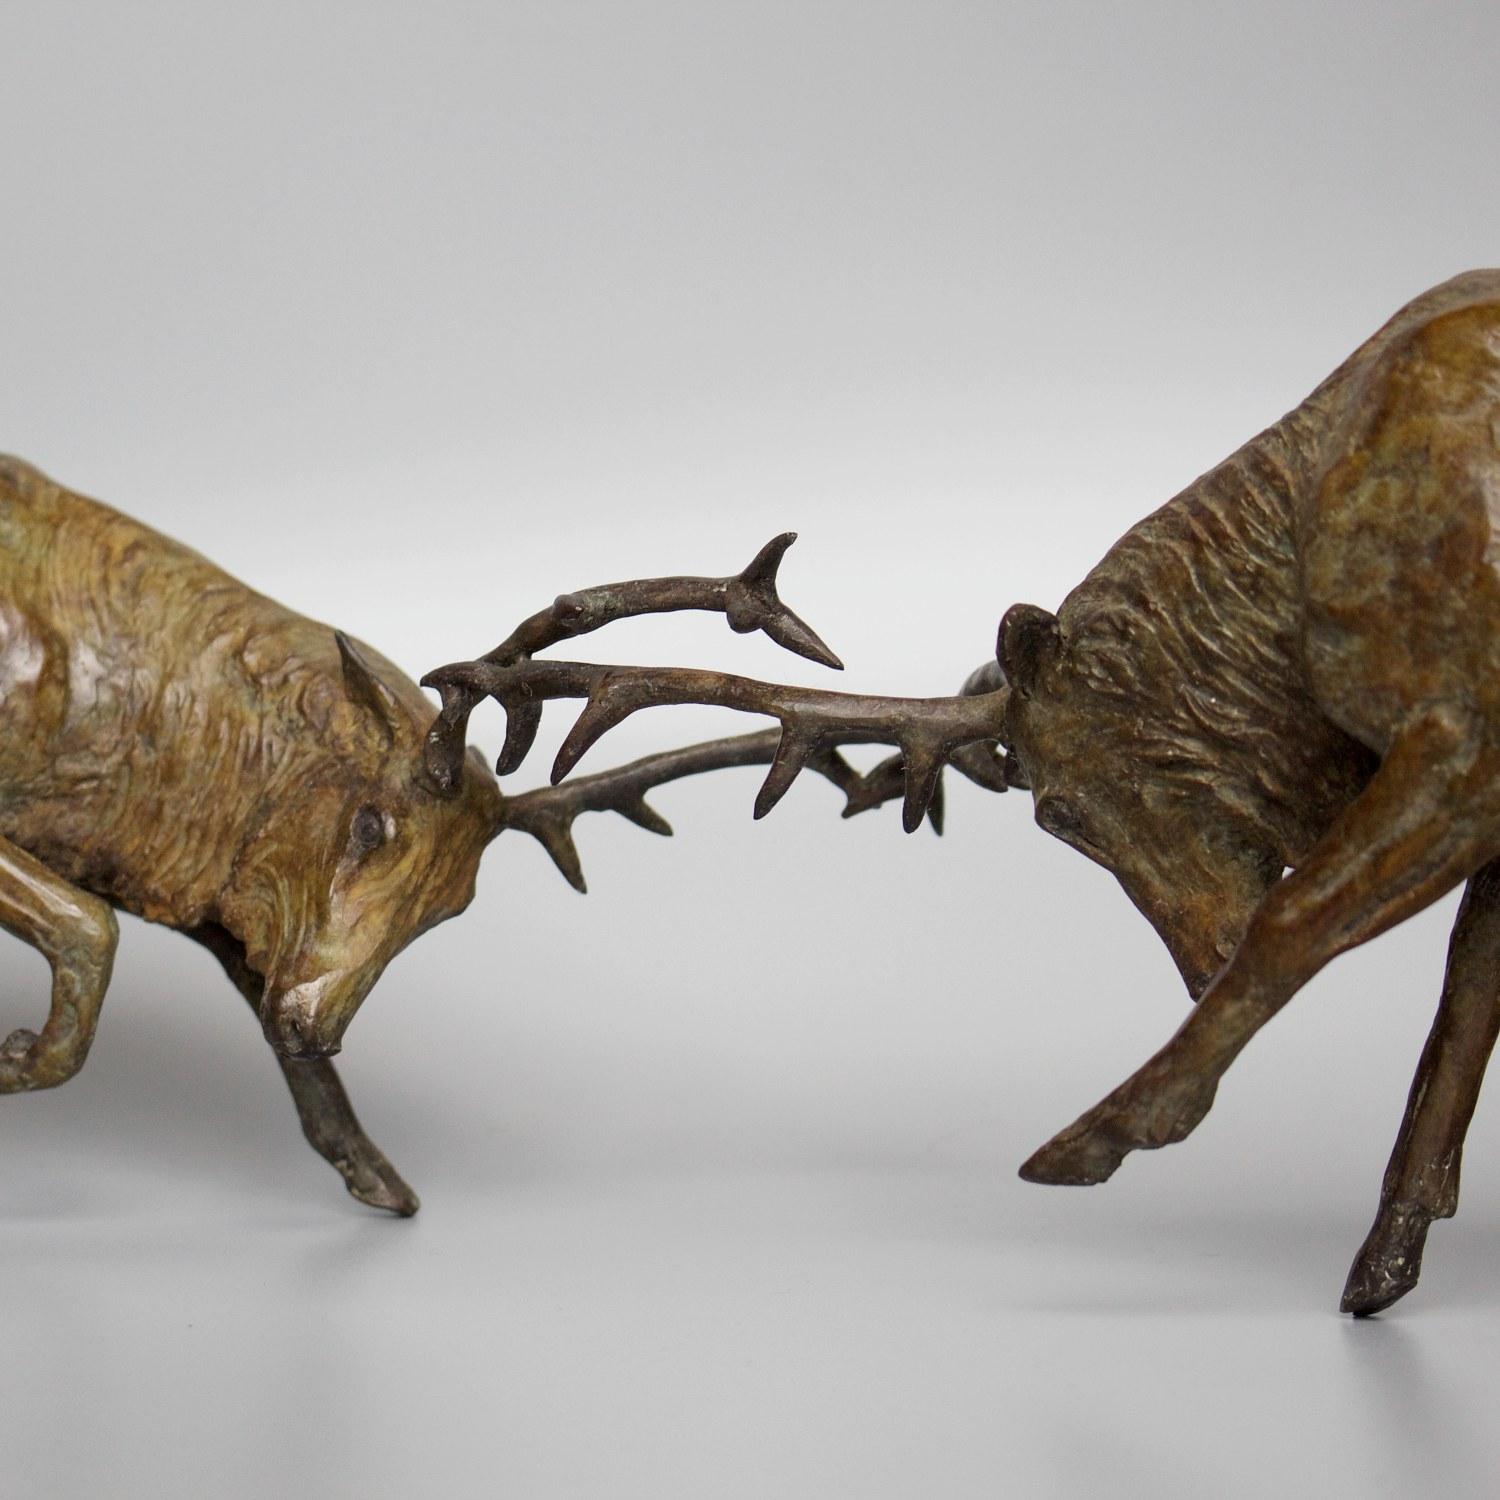 English 'Fighting Stags' Limited Edition Contemporary Bronze Sculpture by Jenna Gearing